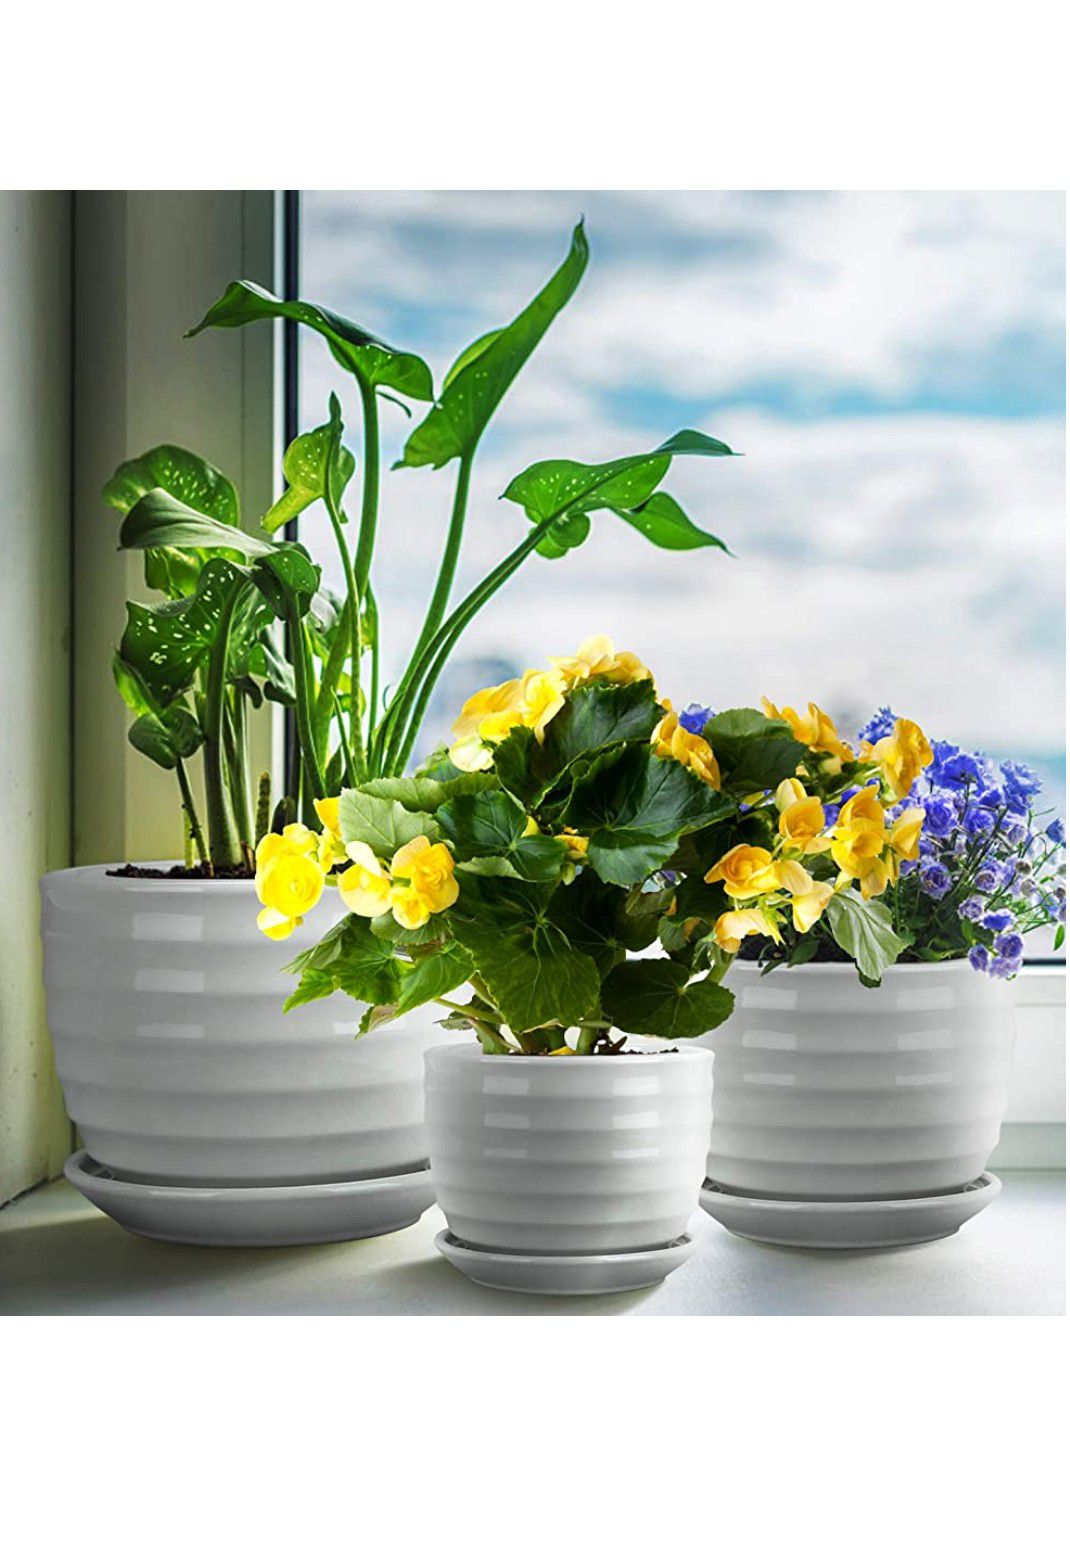 Encheng Round Modern Ceramic Garden Flower Pots Small to Medium Sized,White Planter Pots with Drainage,Succulent Planter Pots with Saucers 3 Pack